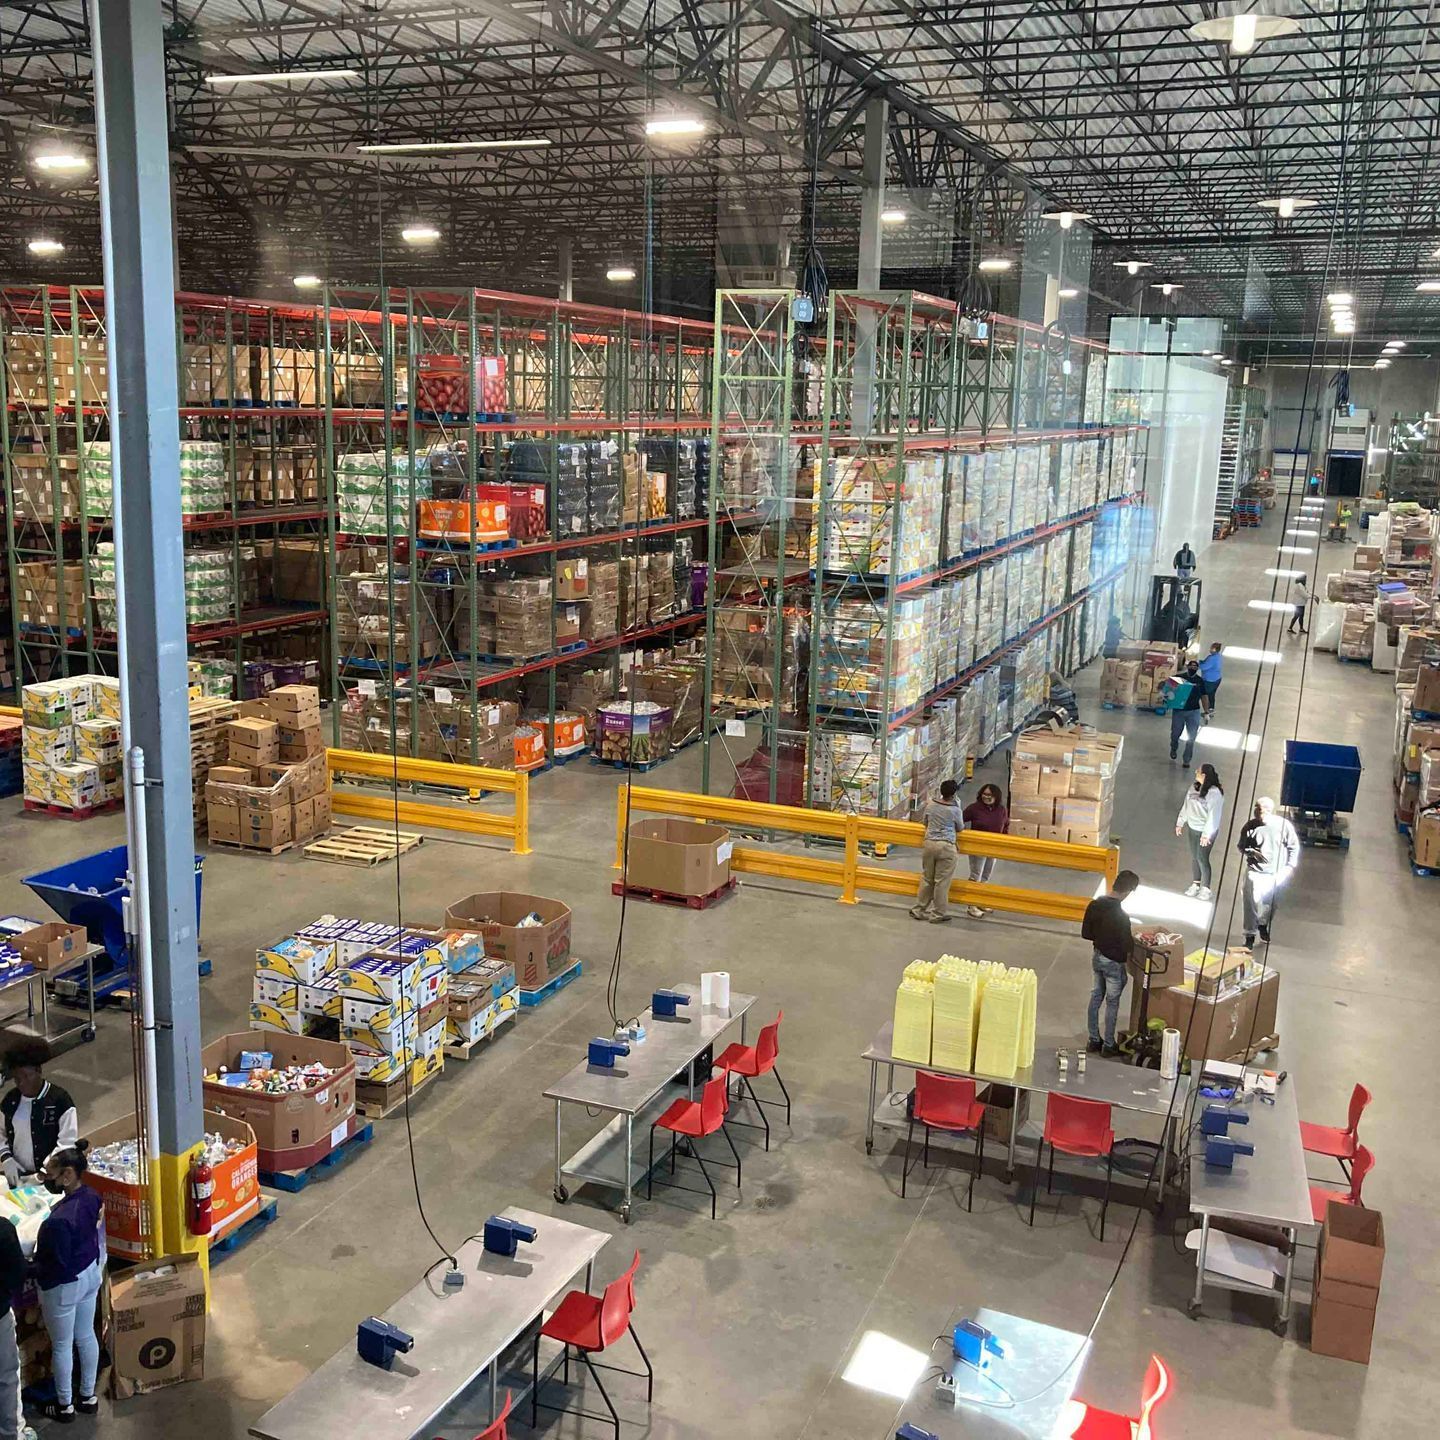 An aerial view of a large warehouse filled with lots of boxes.